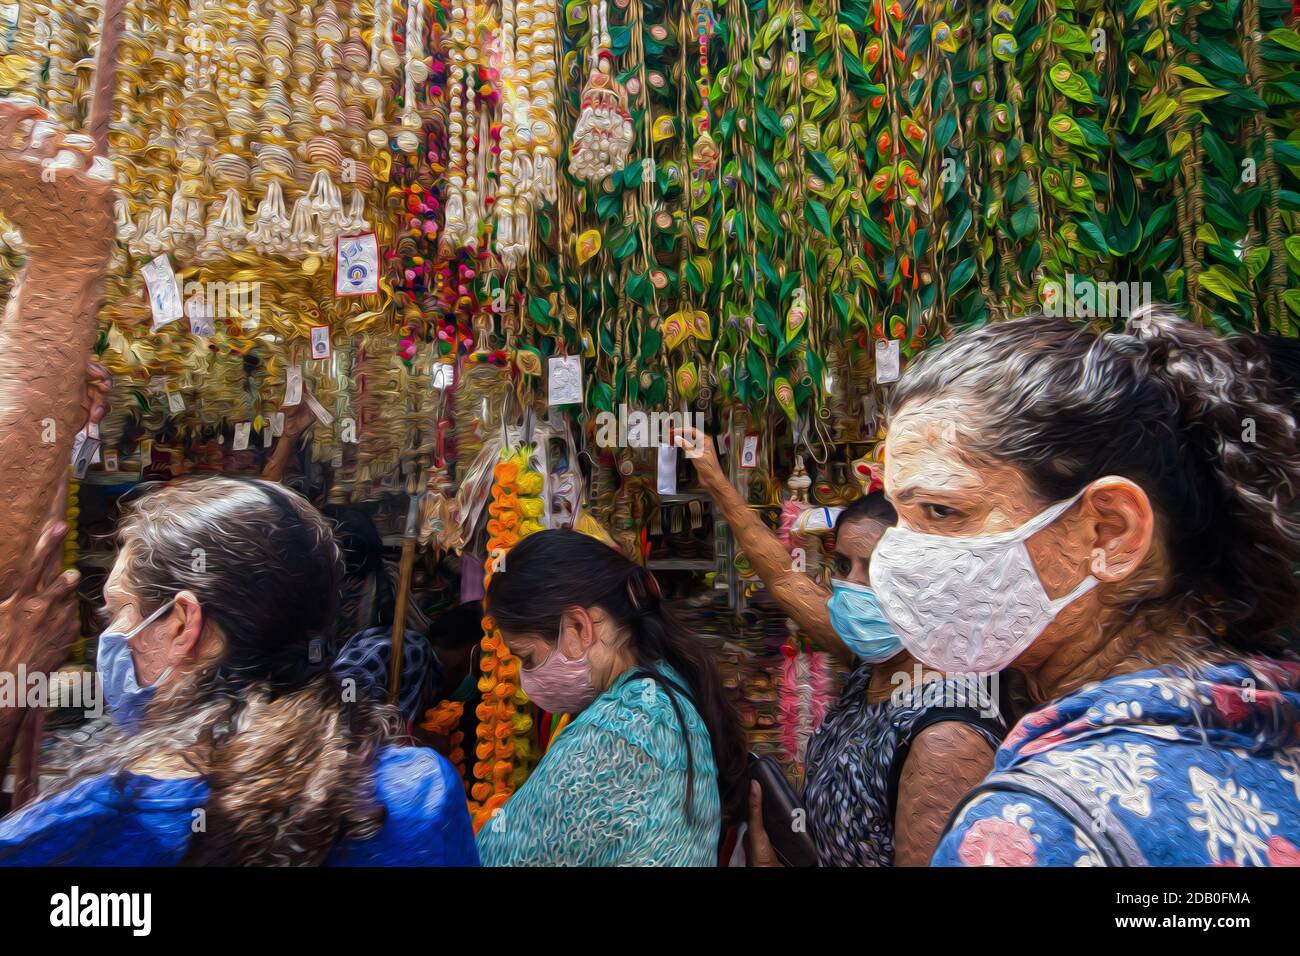 Artistic painting of Indian women choosing decorative items on the street. Singapore. 2020 Stock Photo